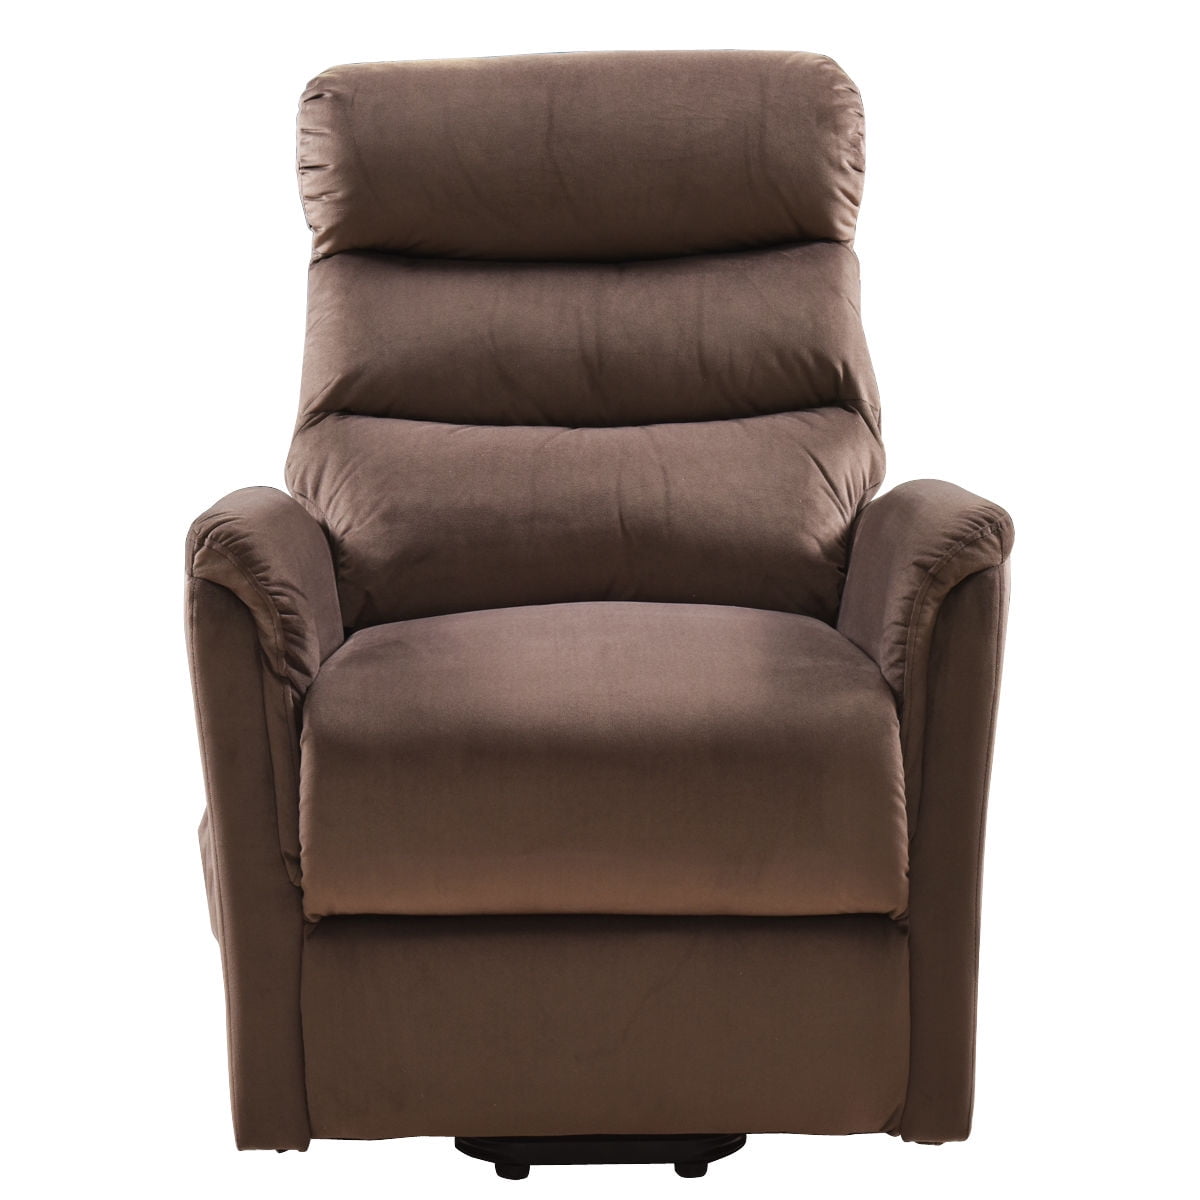 lift-chairs-recliners-covered-by-medicare-electric-lift-chairs-medicare-for-the-elderly